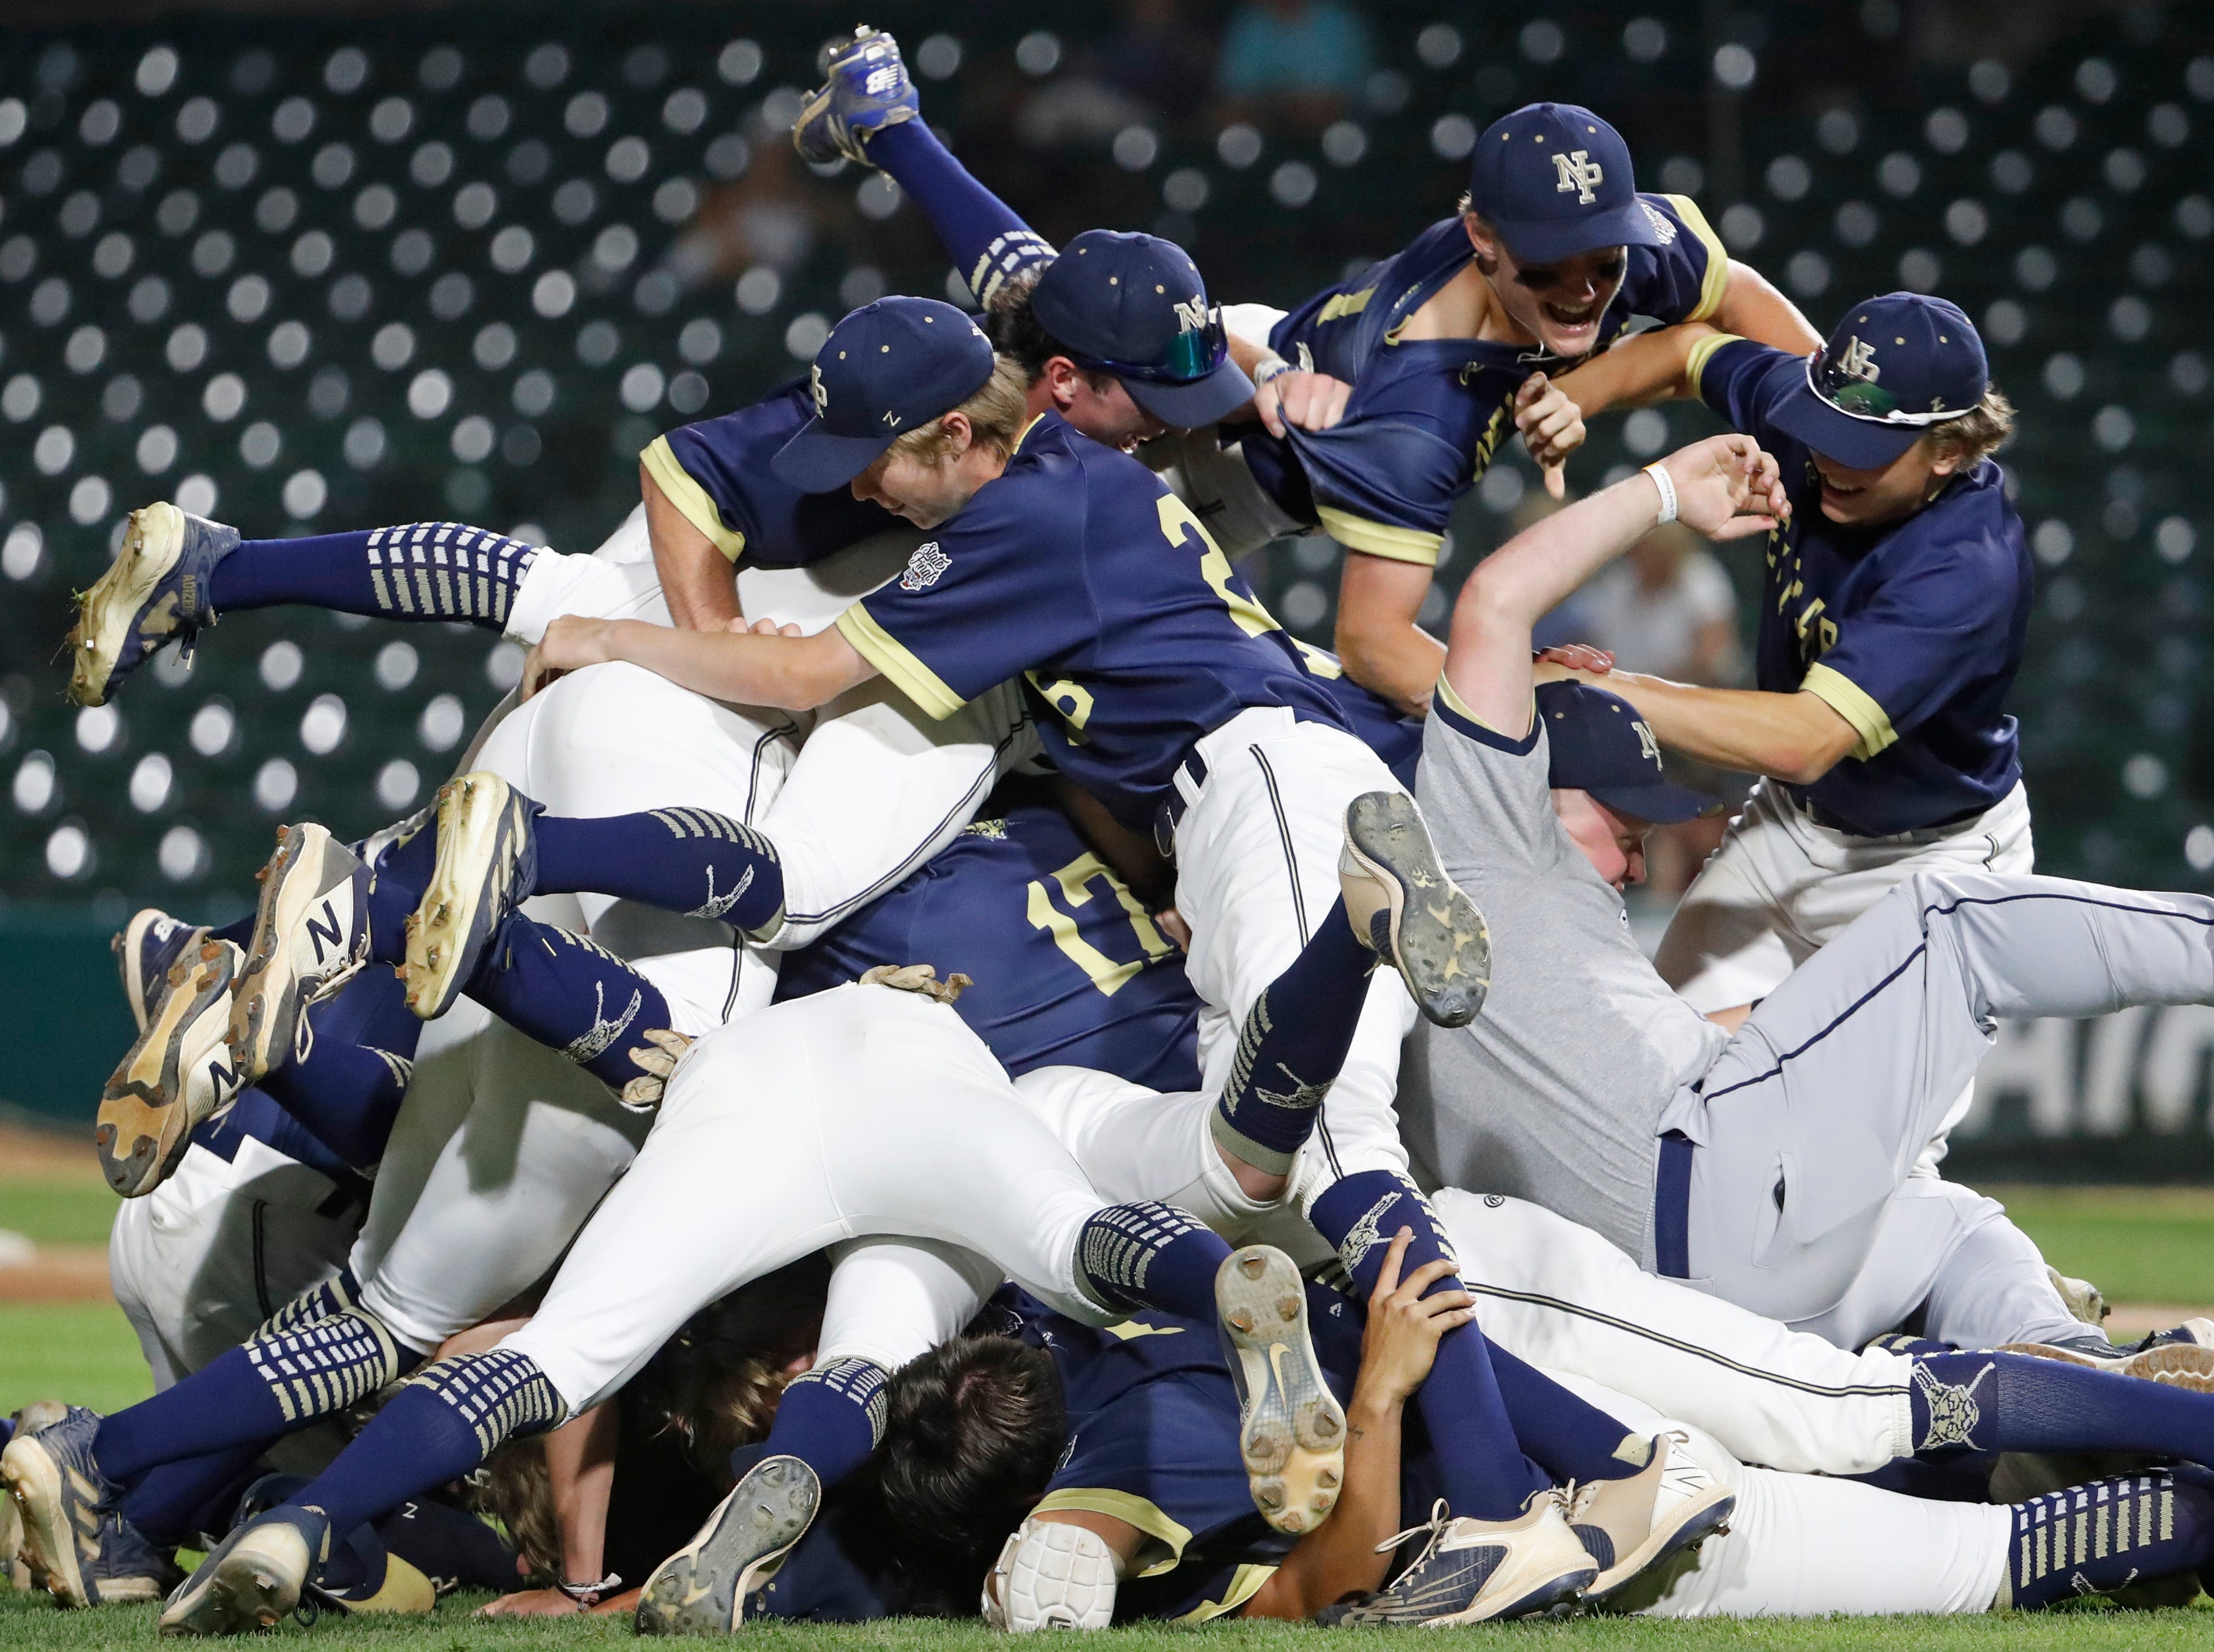 'It's meant to be.' New Prairie baseball wins IHSAA Class 3A state championship over Brebeuf Jesuit